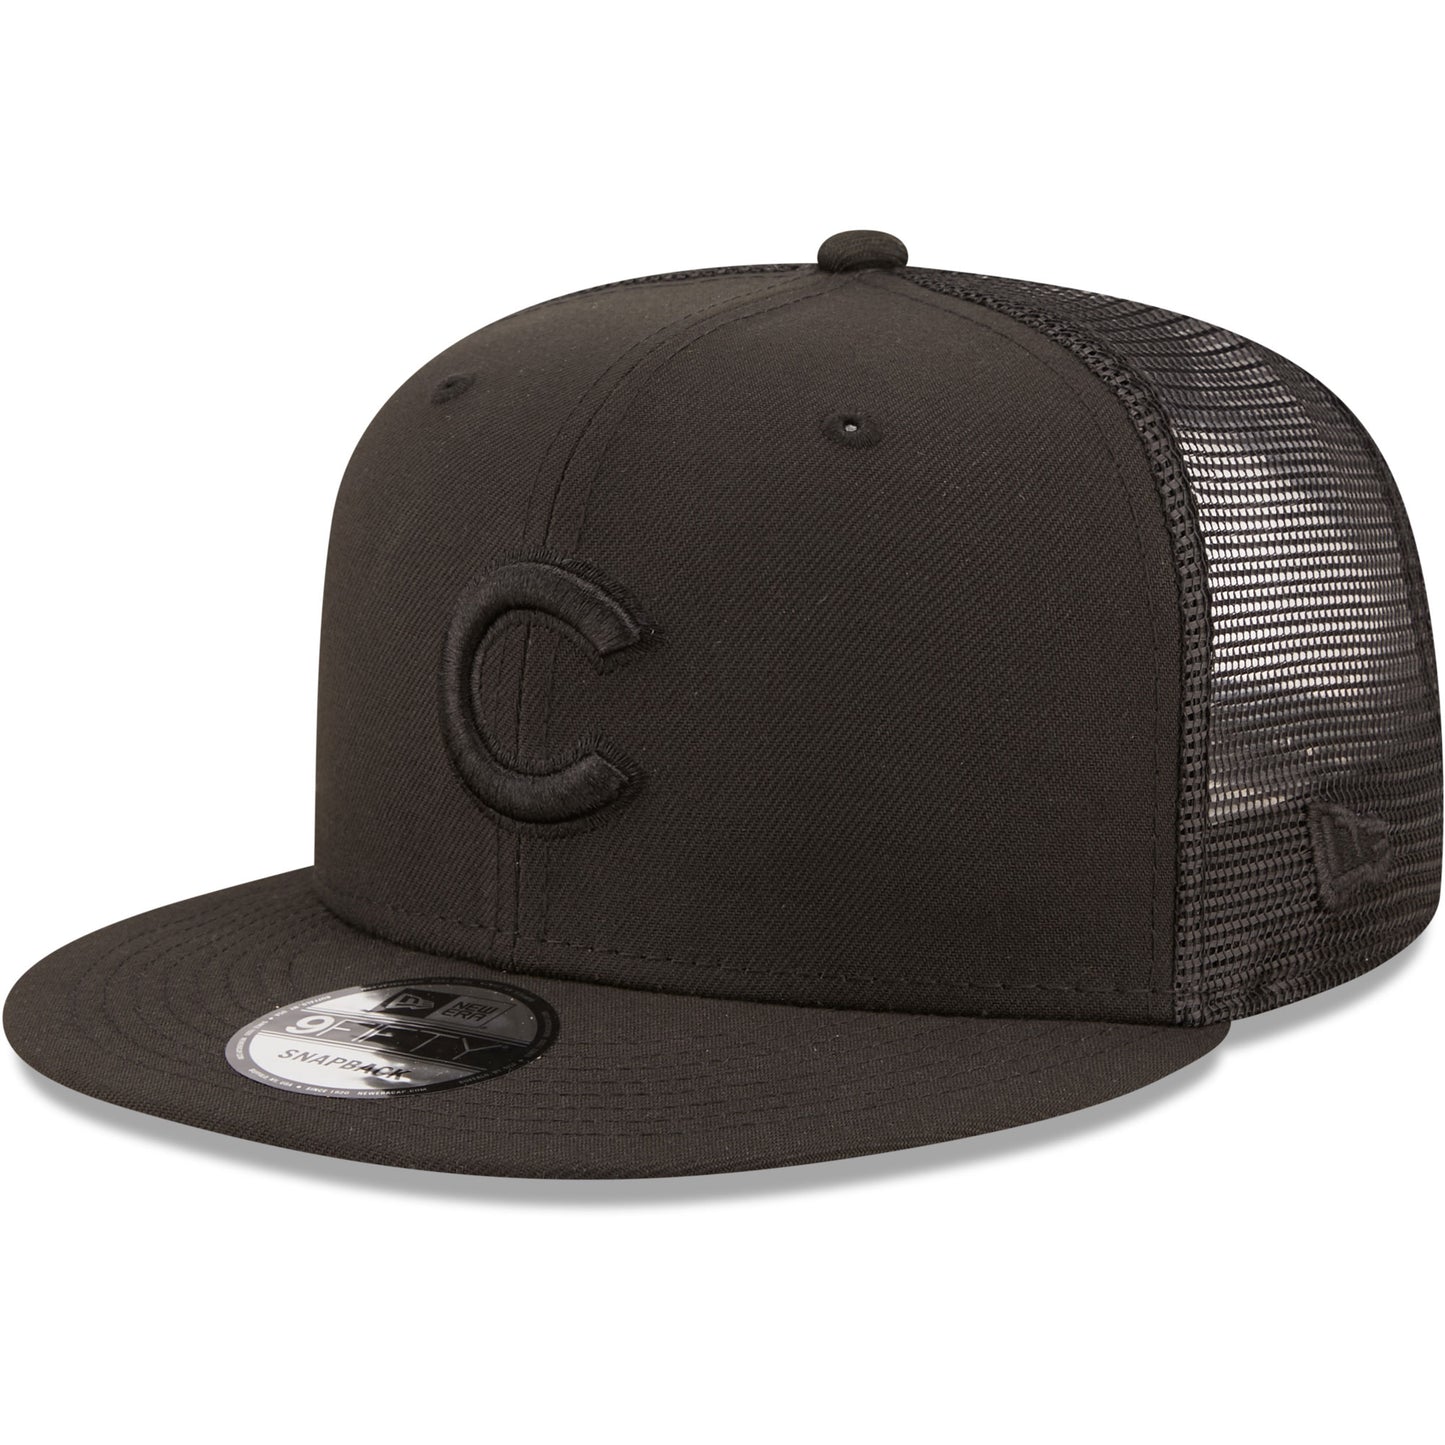 Chicago Cubs New Era Blackout Trucker 9FIFTY Snapback Hat